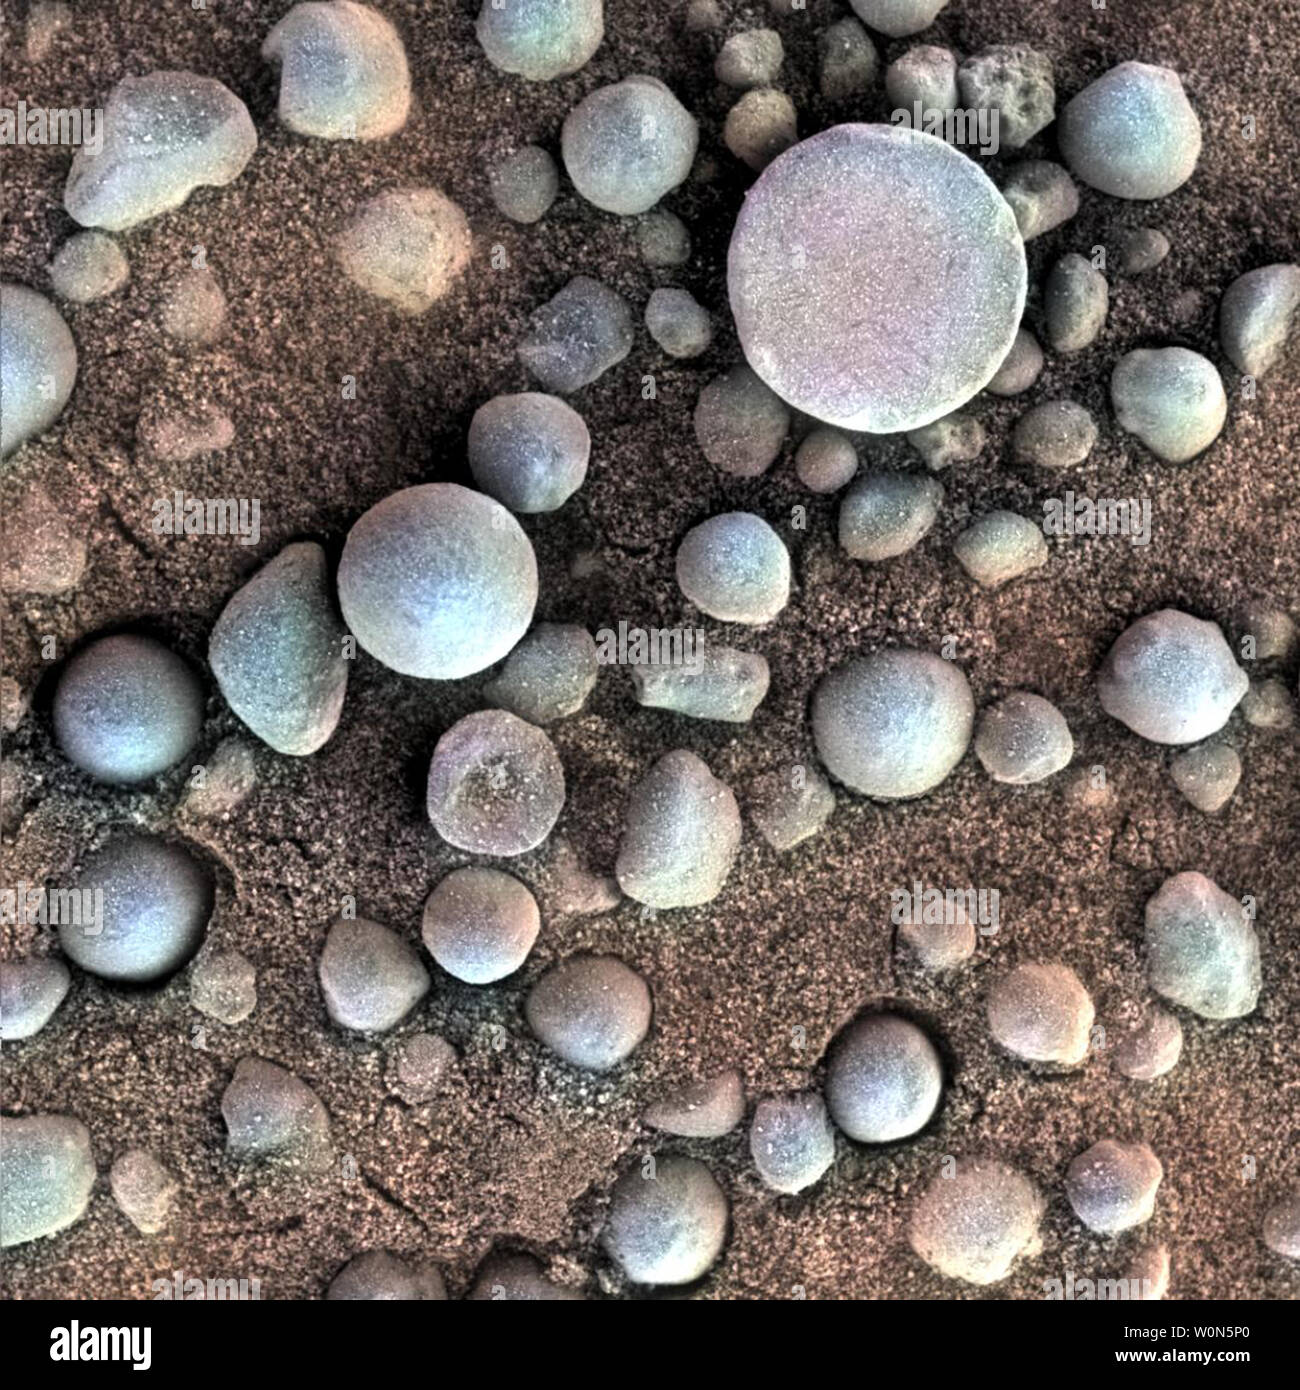 The small spherules on the Martian surface in this close-up image are near Fram Crater, visited by NASA's Mars Exploration Rover Opportunity during the 84th Martian day, or sol, of the rover's work on Mars (April 19, 2004). The area shown is 1.2 inches (3 centimeters) across. These are examples of the mineral concretions nicknamed 'blueberries.' Opportunity's investigation of the hematite-rich concretions during the rover's three-month prime mission in early 2004 provided evidence of a watery ancient environment. NASA announced on February 13, 2019, that one of the most successful and enduring Stock Photo